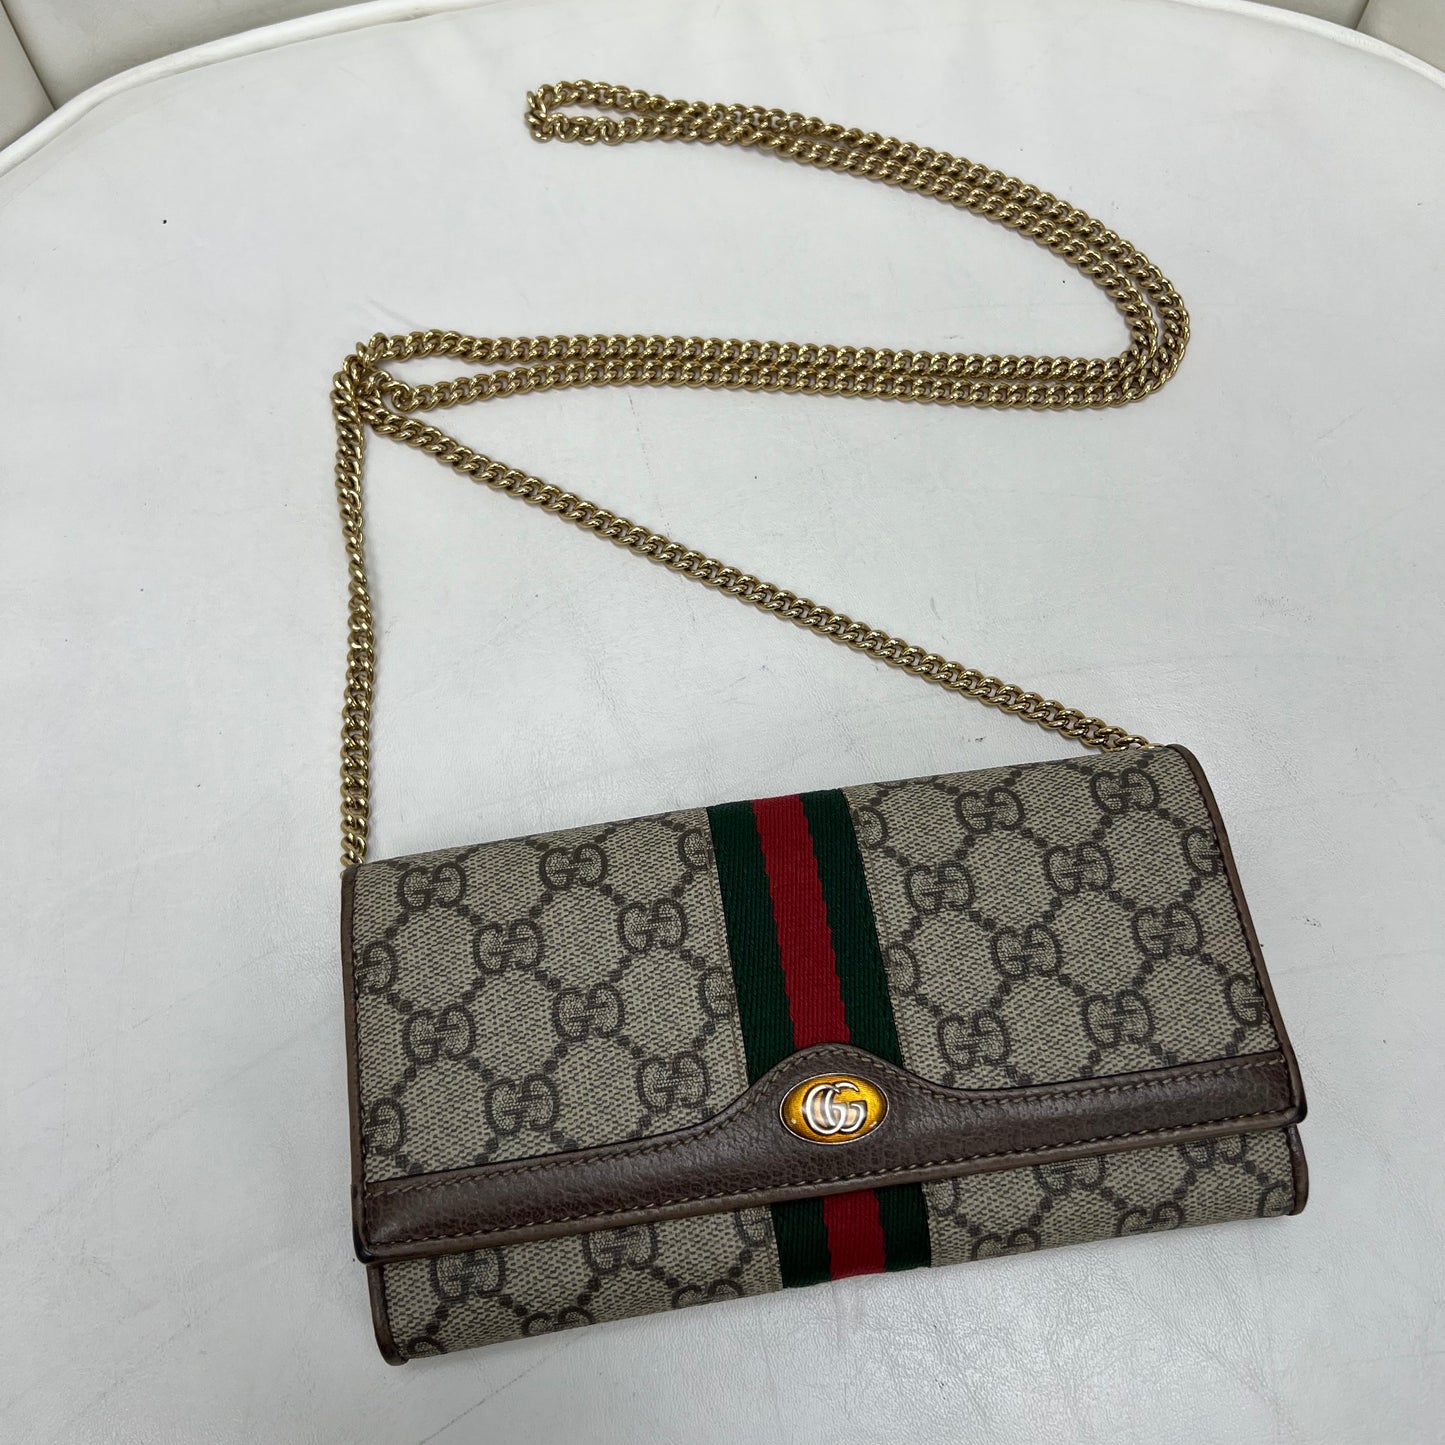 Gucci Ophidia Chain Wallet